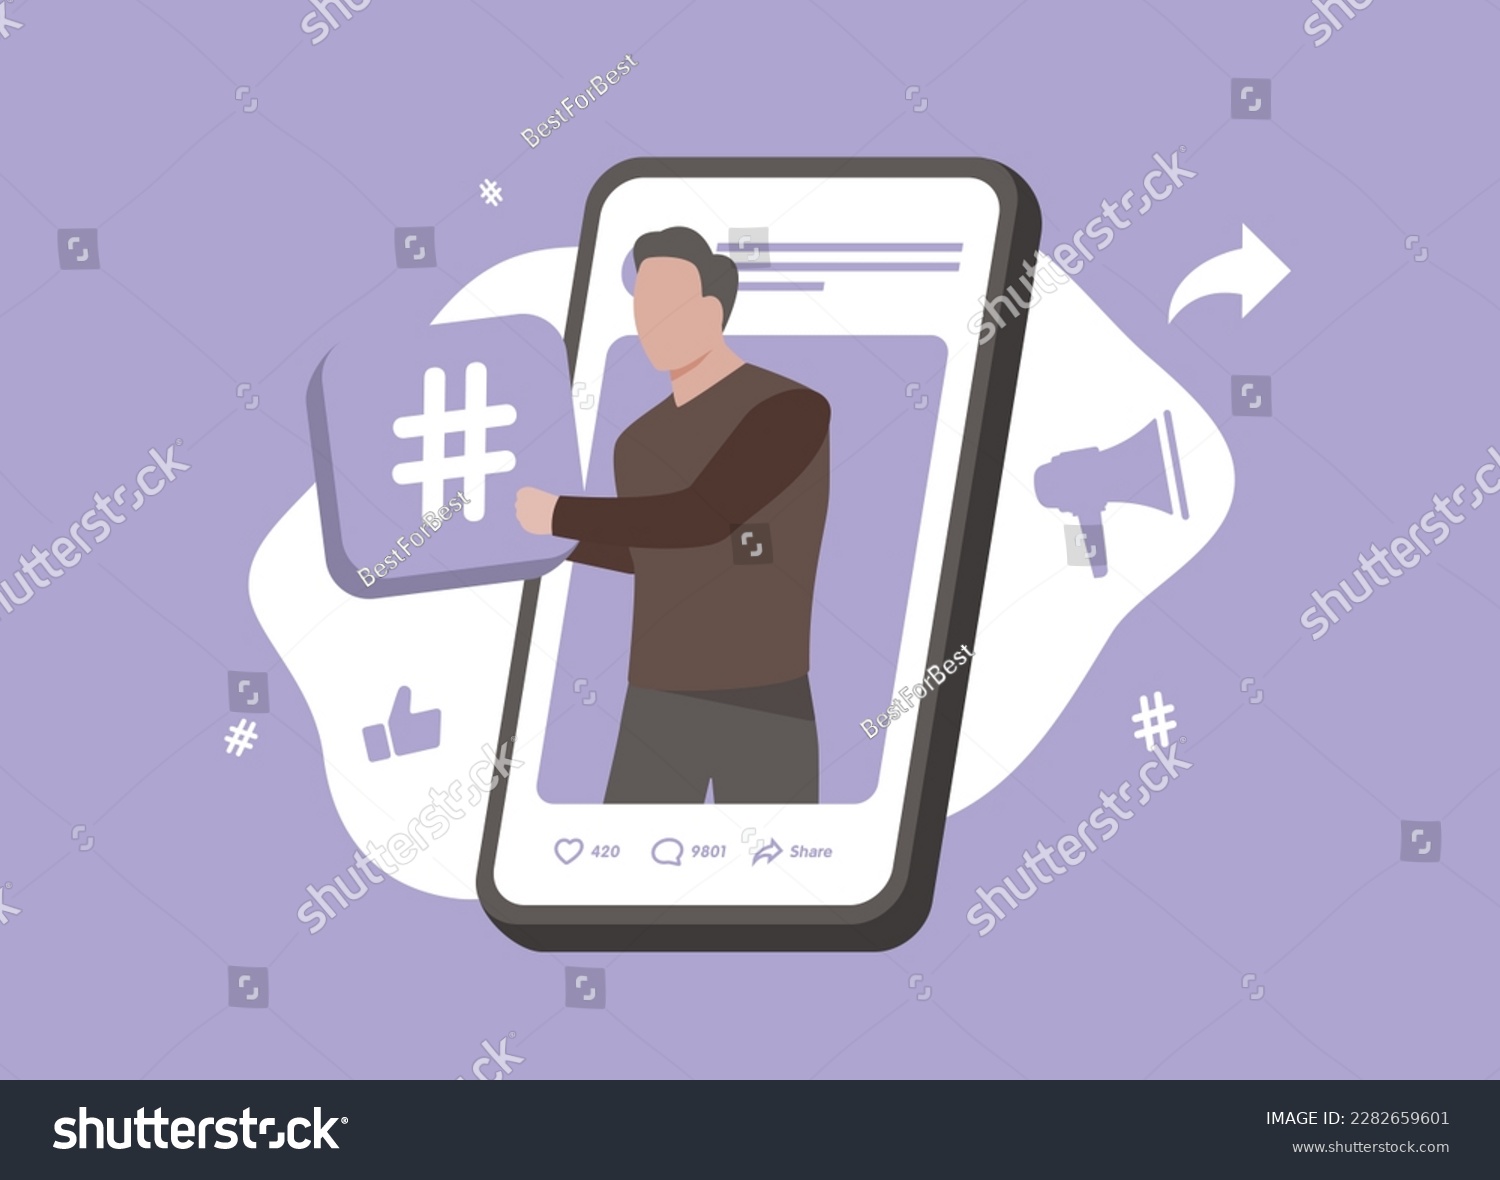 SVG of Hashtag marketing - brand partnerships with social media content creators. Sponsored influencer affiliate marketing content. Word-of-mouth influencer marketing with brand, product in social media svg